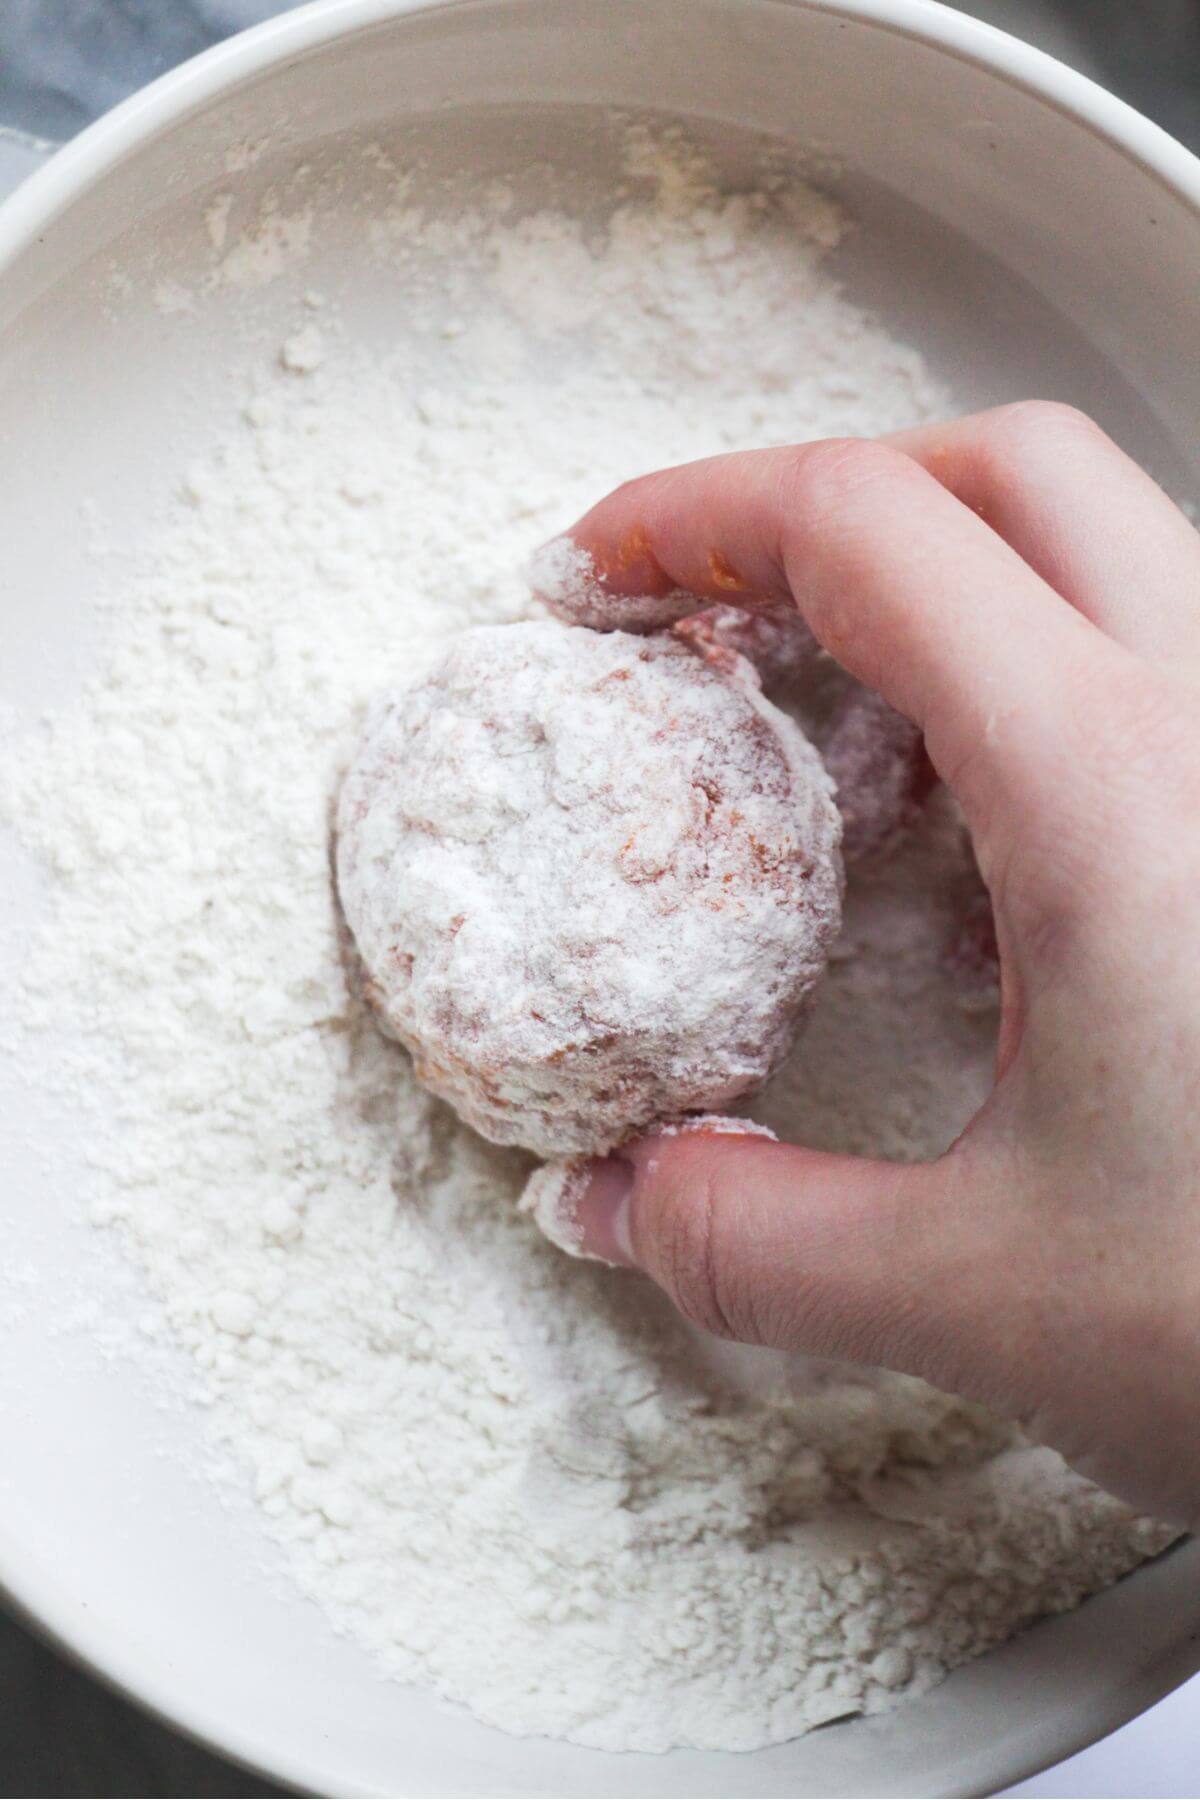 Hand tossing arancini ball in a small bowl of flour.